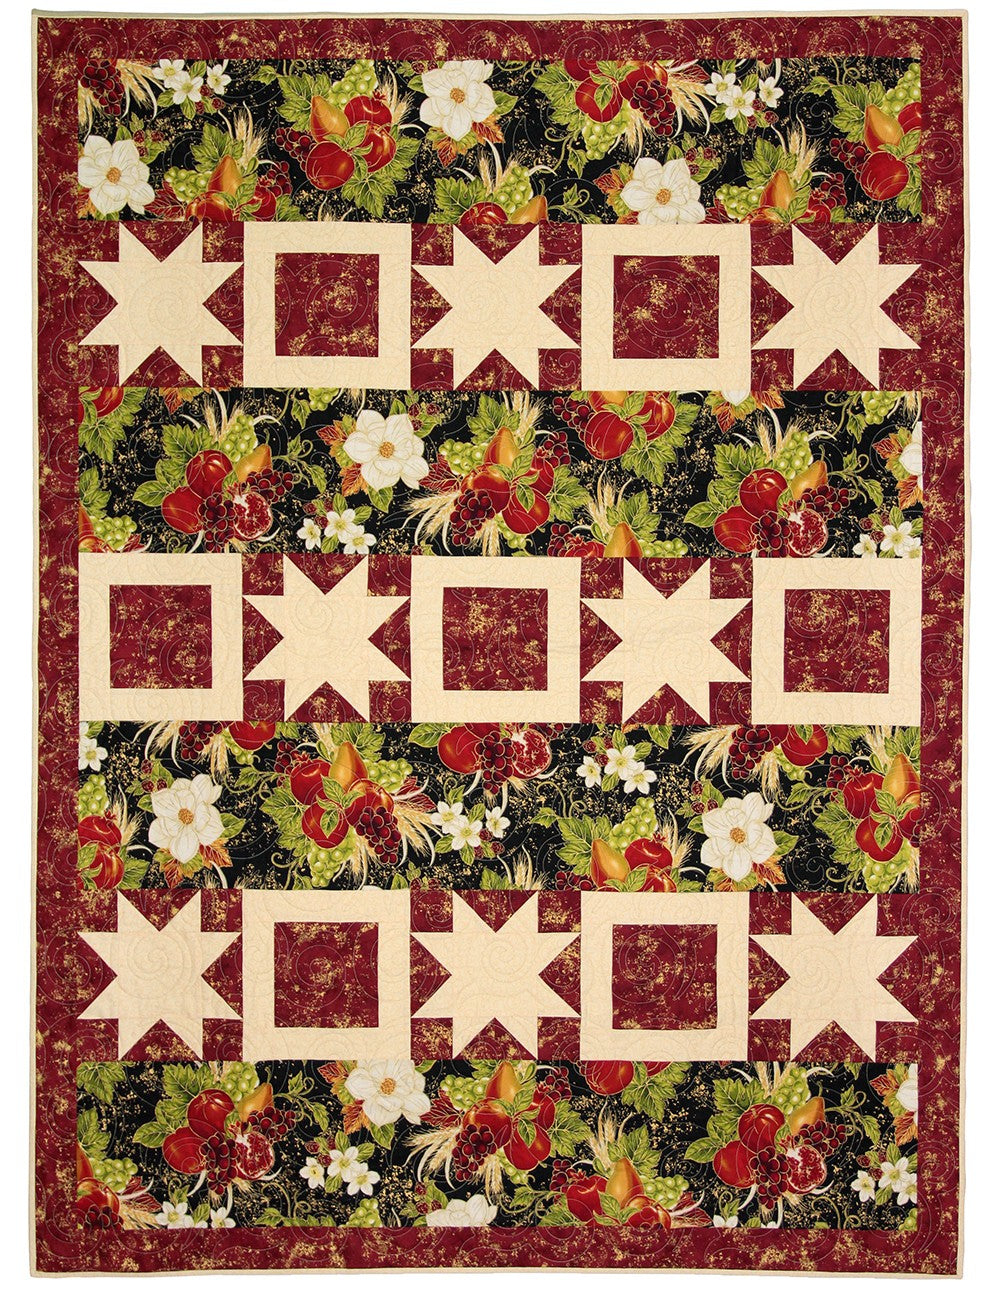 The Magic of 3 Yard Quilts Book by Donna Robertson